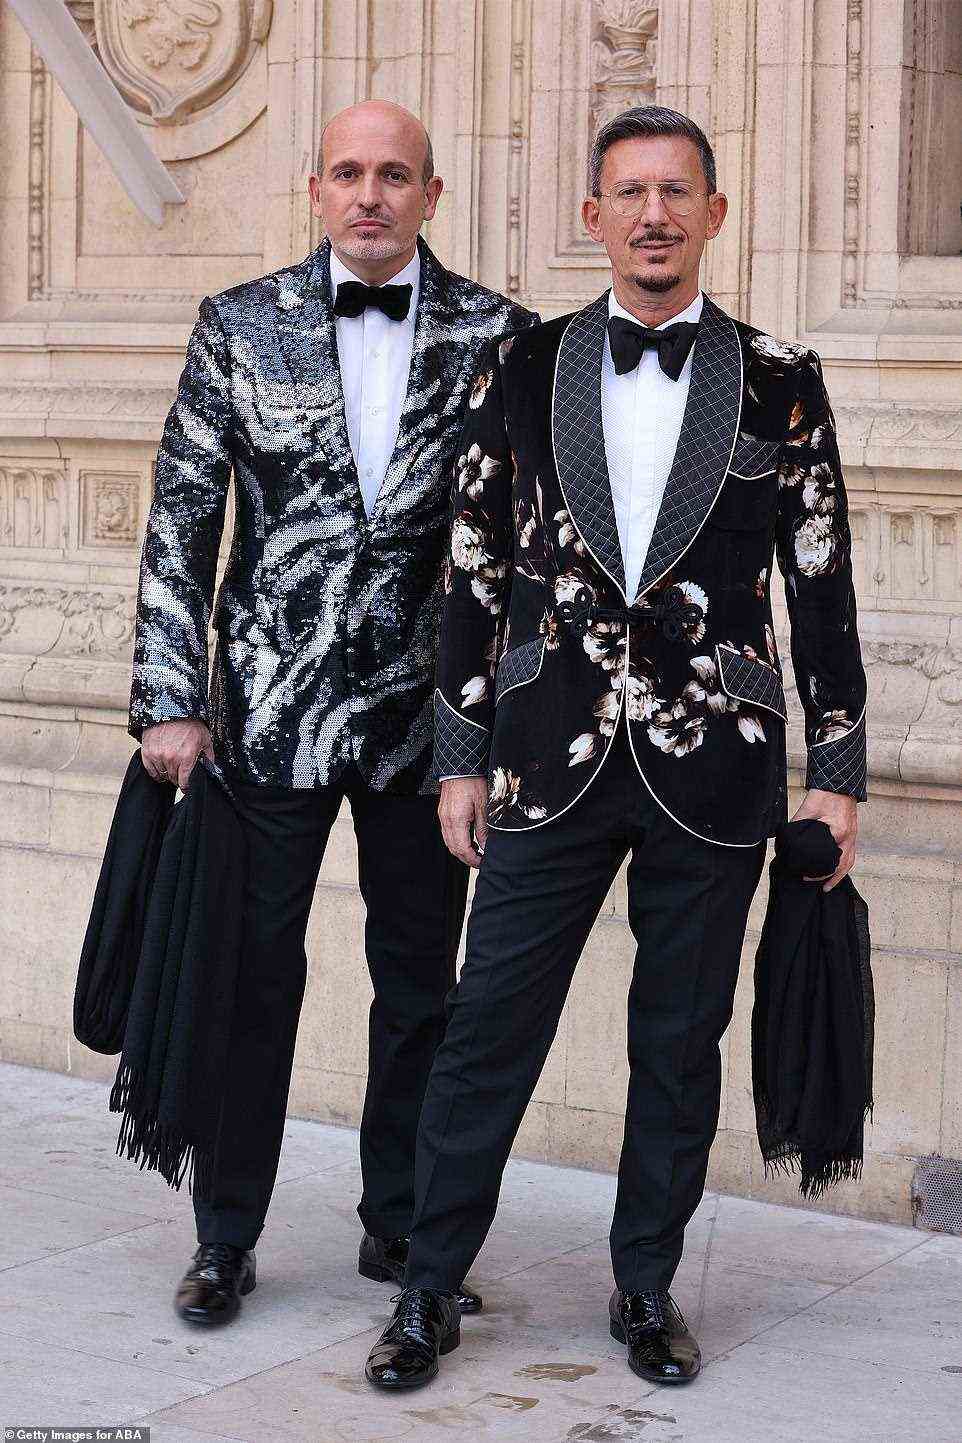 Matching: Fashion influencers Alessandro Maria Ferreri with Marco Bonaldo caught the eye in smart suit trousers teamed with show-stopping patterned blazers